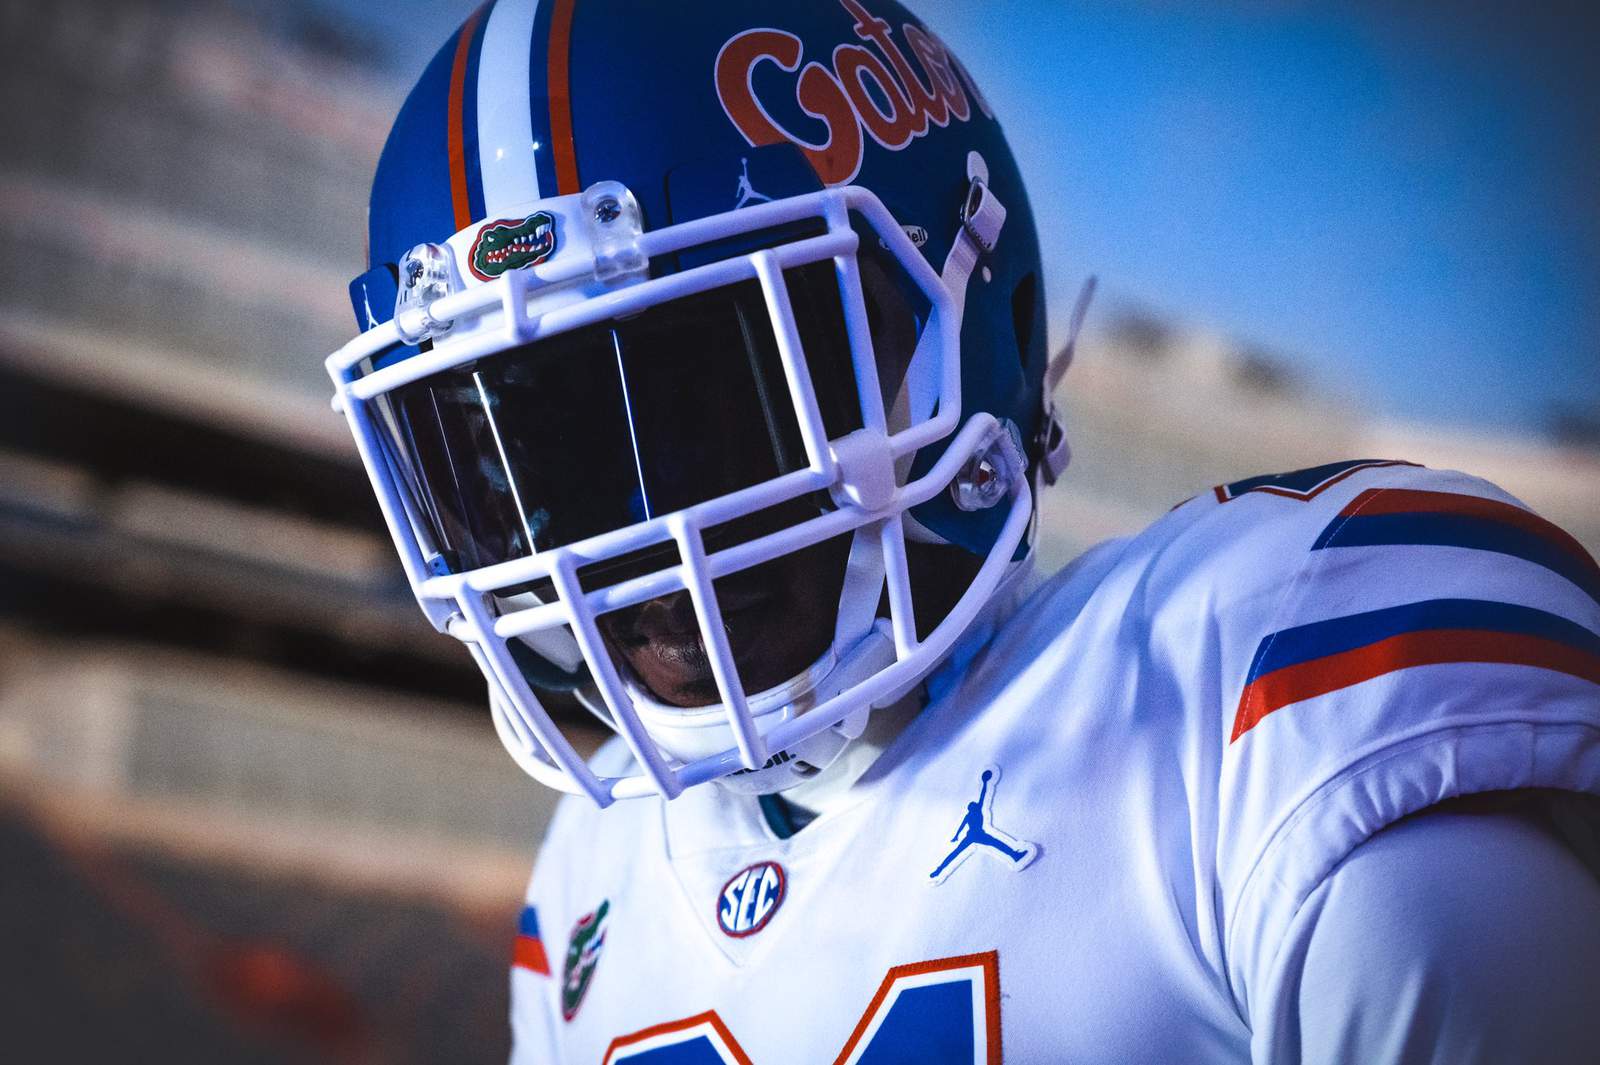 LOOK: Florida to wear new blue helmets vs Tennessee on Saturday